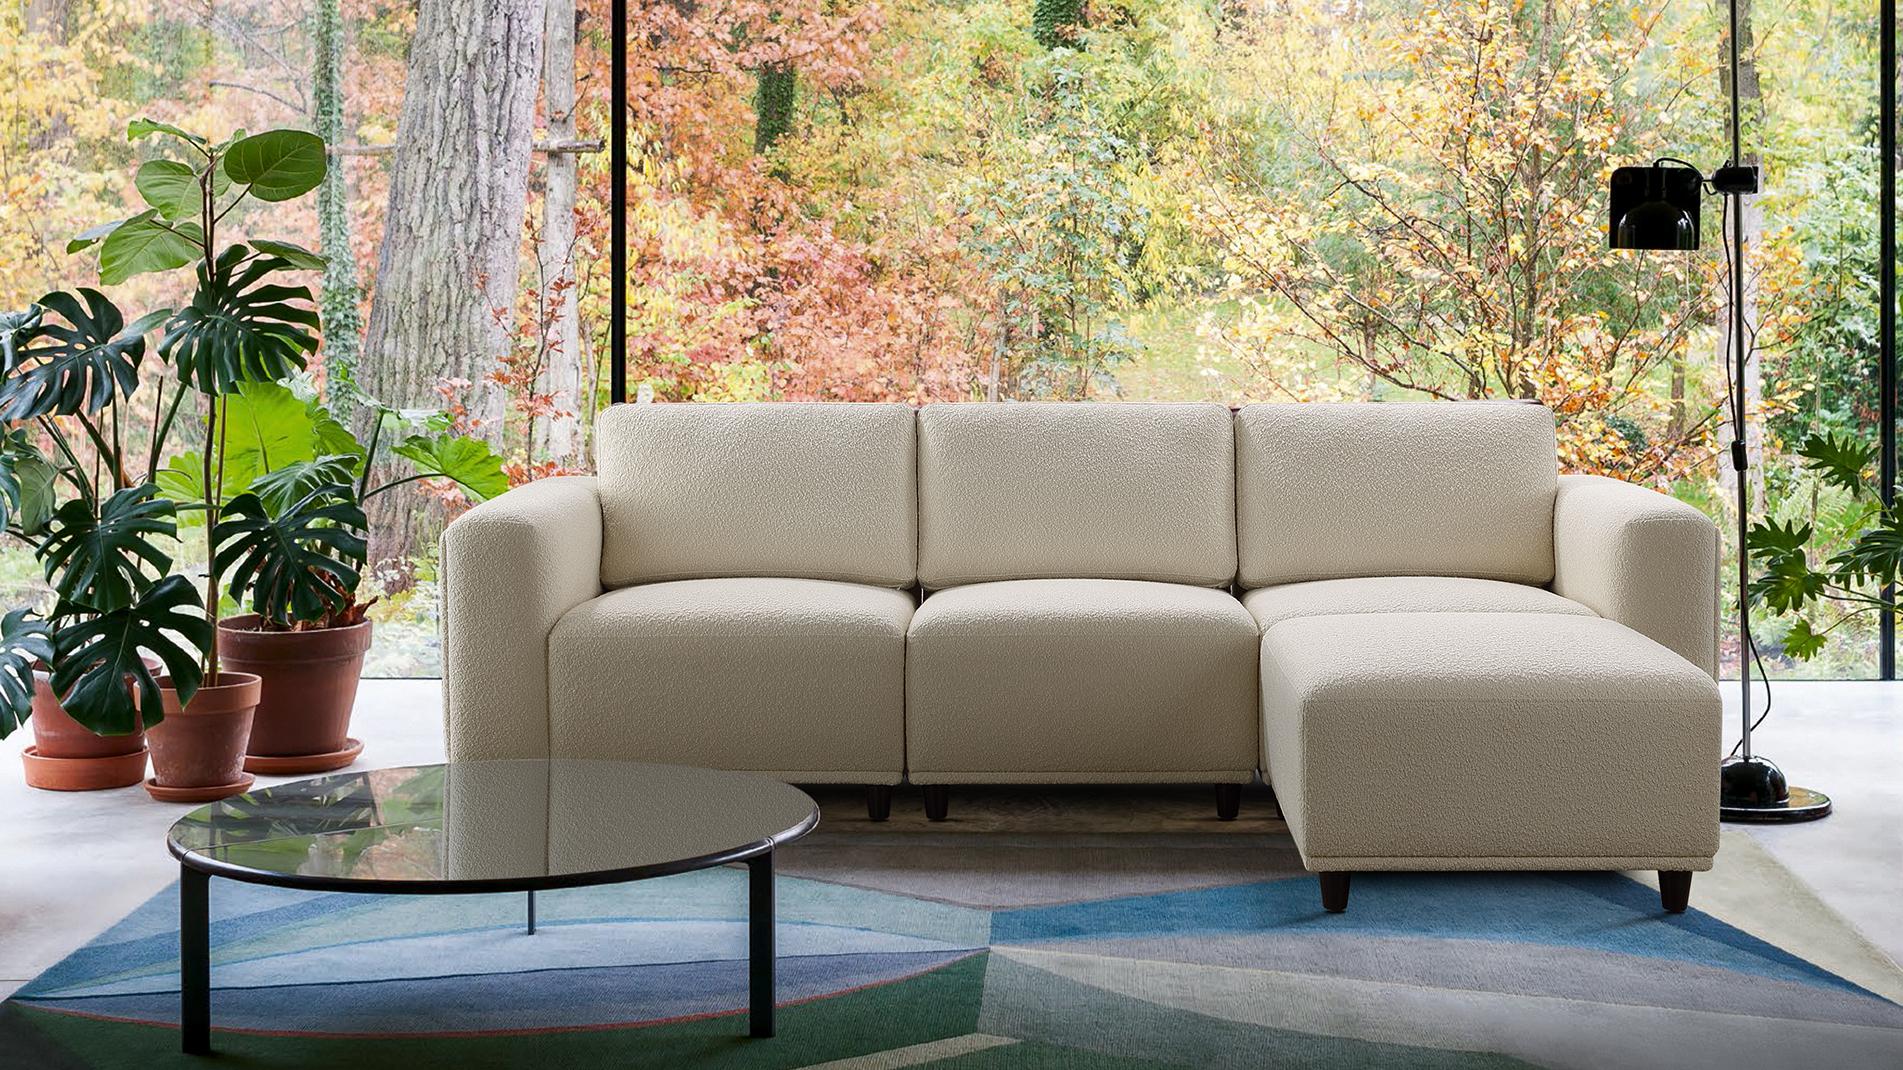 Get your swivel on with our chic and cozy chairs and sofas.